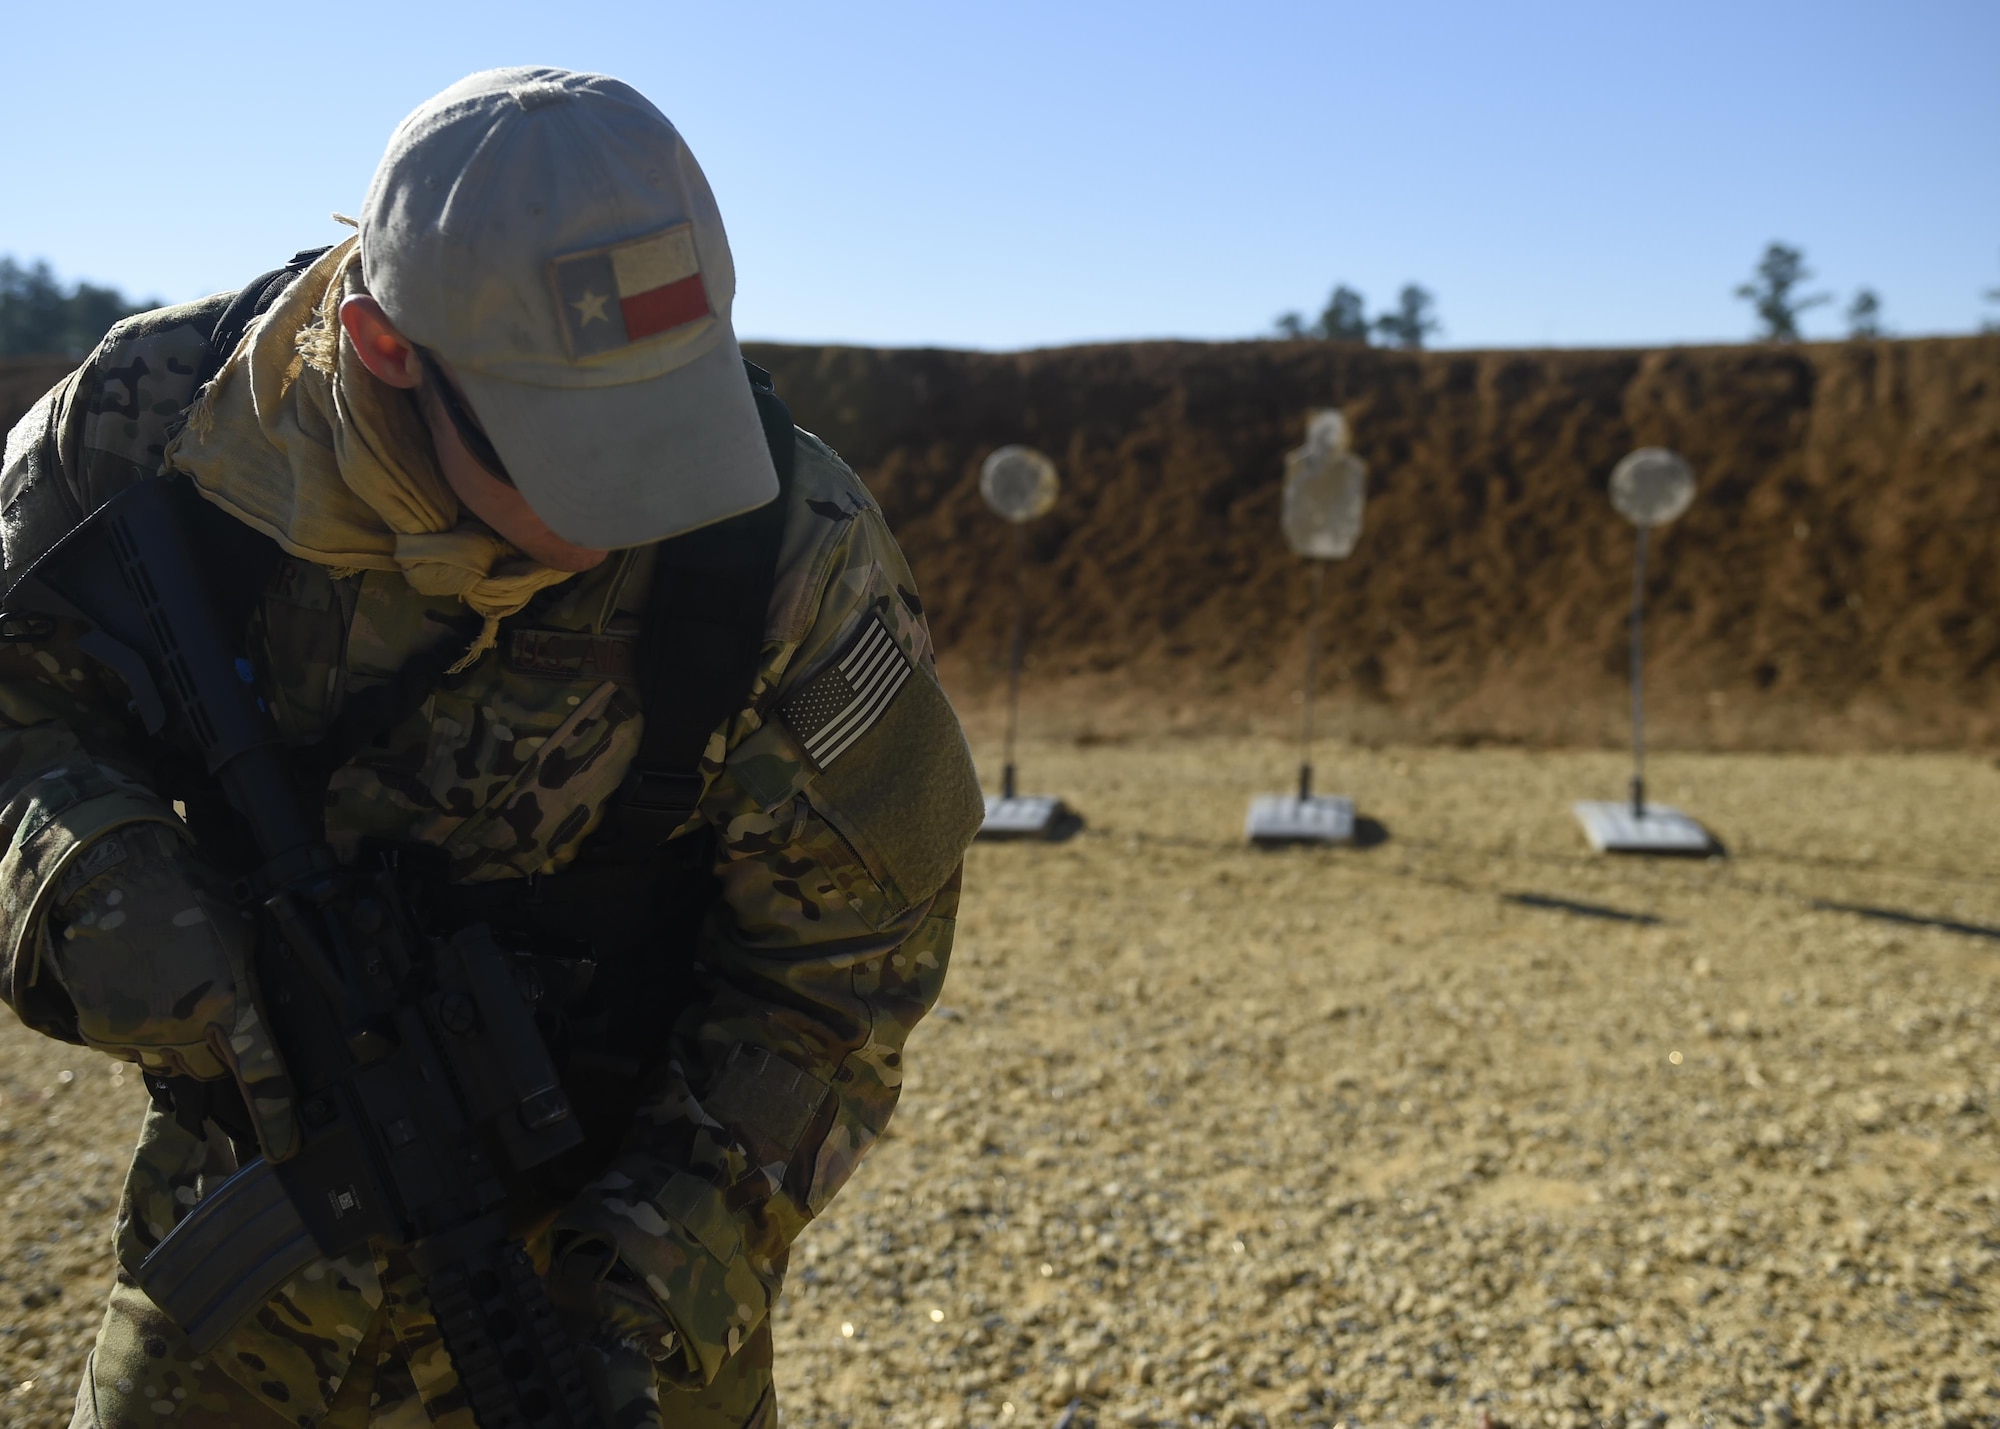 First Lt. Austin Zimmer, a U-28A pilot with the 318th Special Operations Squadron, practices the ‘El Presidente’ drill with his M4 carbine at a firing range near Baker, Fla., Feb. 24, 2016. The ‘El Presidente’ drill was developed to train shooters to identify and engage multiple targets quickly and accurately at short ranges. The irregular nature of Air Force Special Operations Command’s mission sometimes require air crews to operate in austere conditions downrange, which prompted the creation of the Air Commando Field Skills Course. (U.S. Air Force photo by Airman 1st Class Kai White)